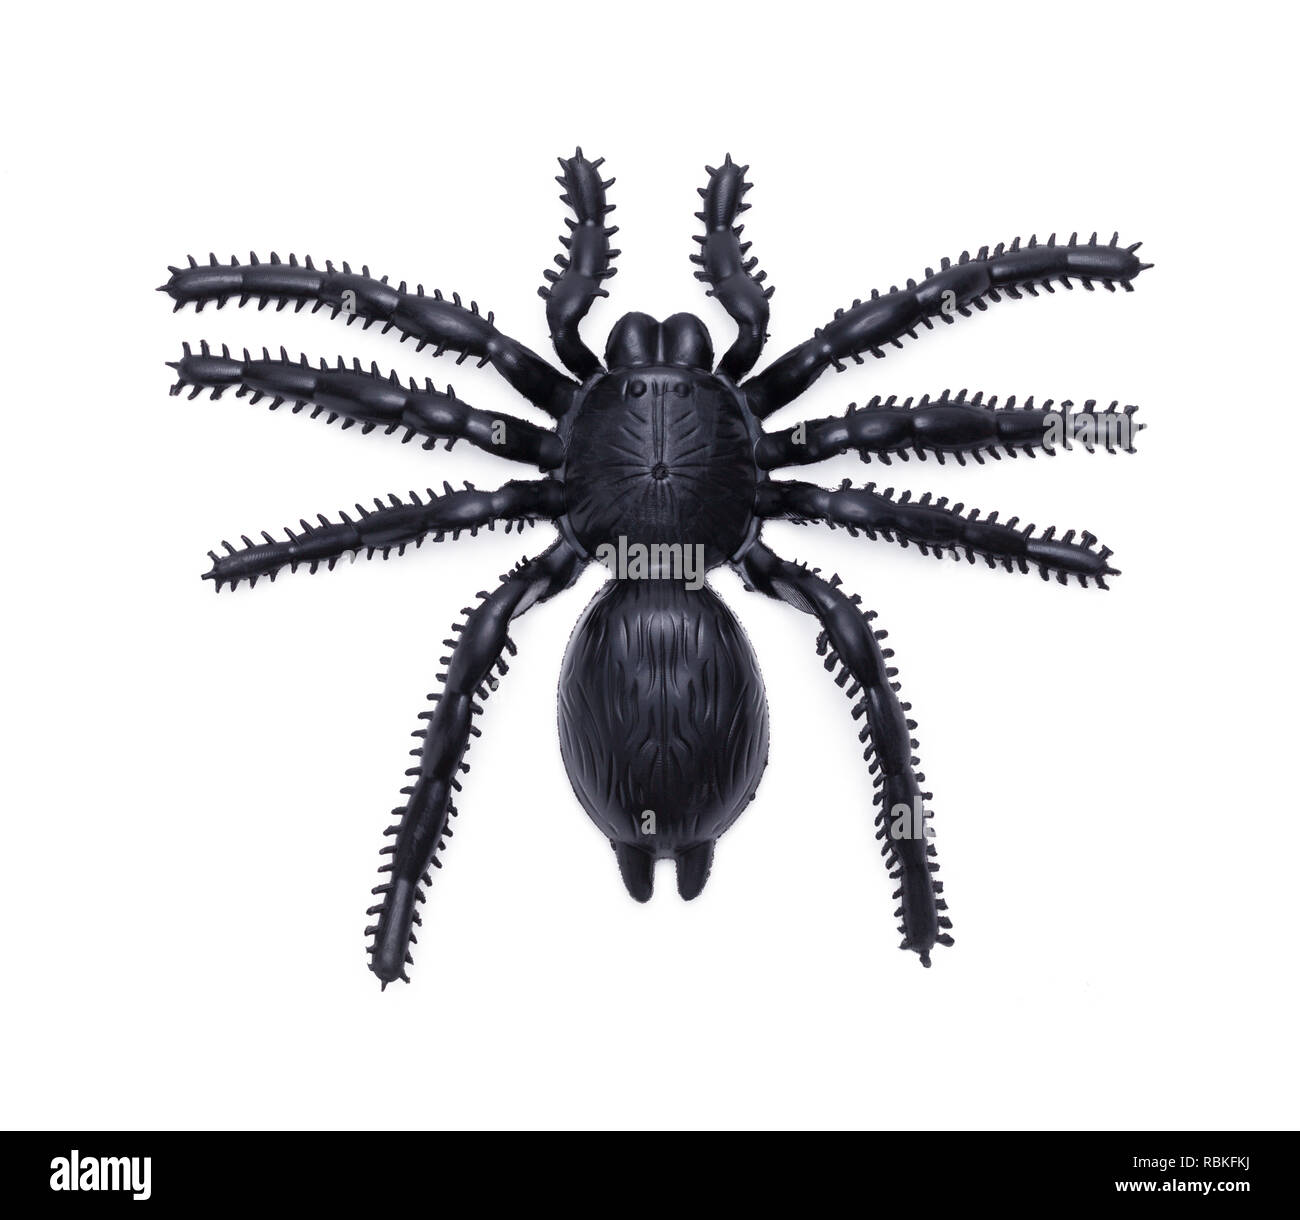 Black Rubber Spider Isolated on a White Background. Stock Photo